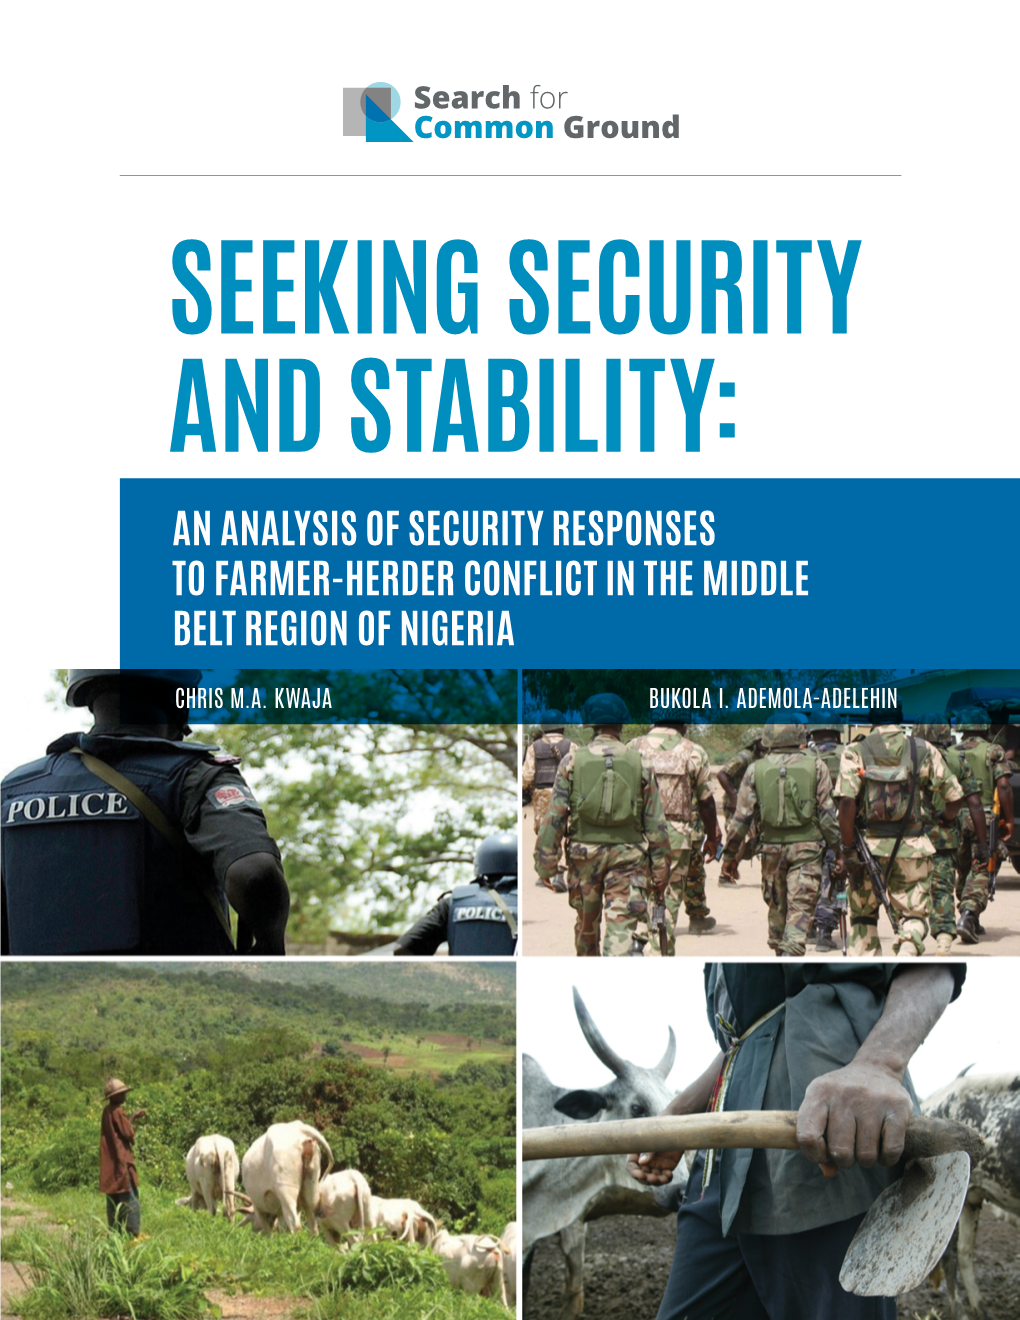 Seeking Security and Stability: an Analysis of Security Responses to Farmer-Herder Conflict in the Middle Belt Region of Nigeria